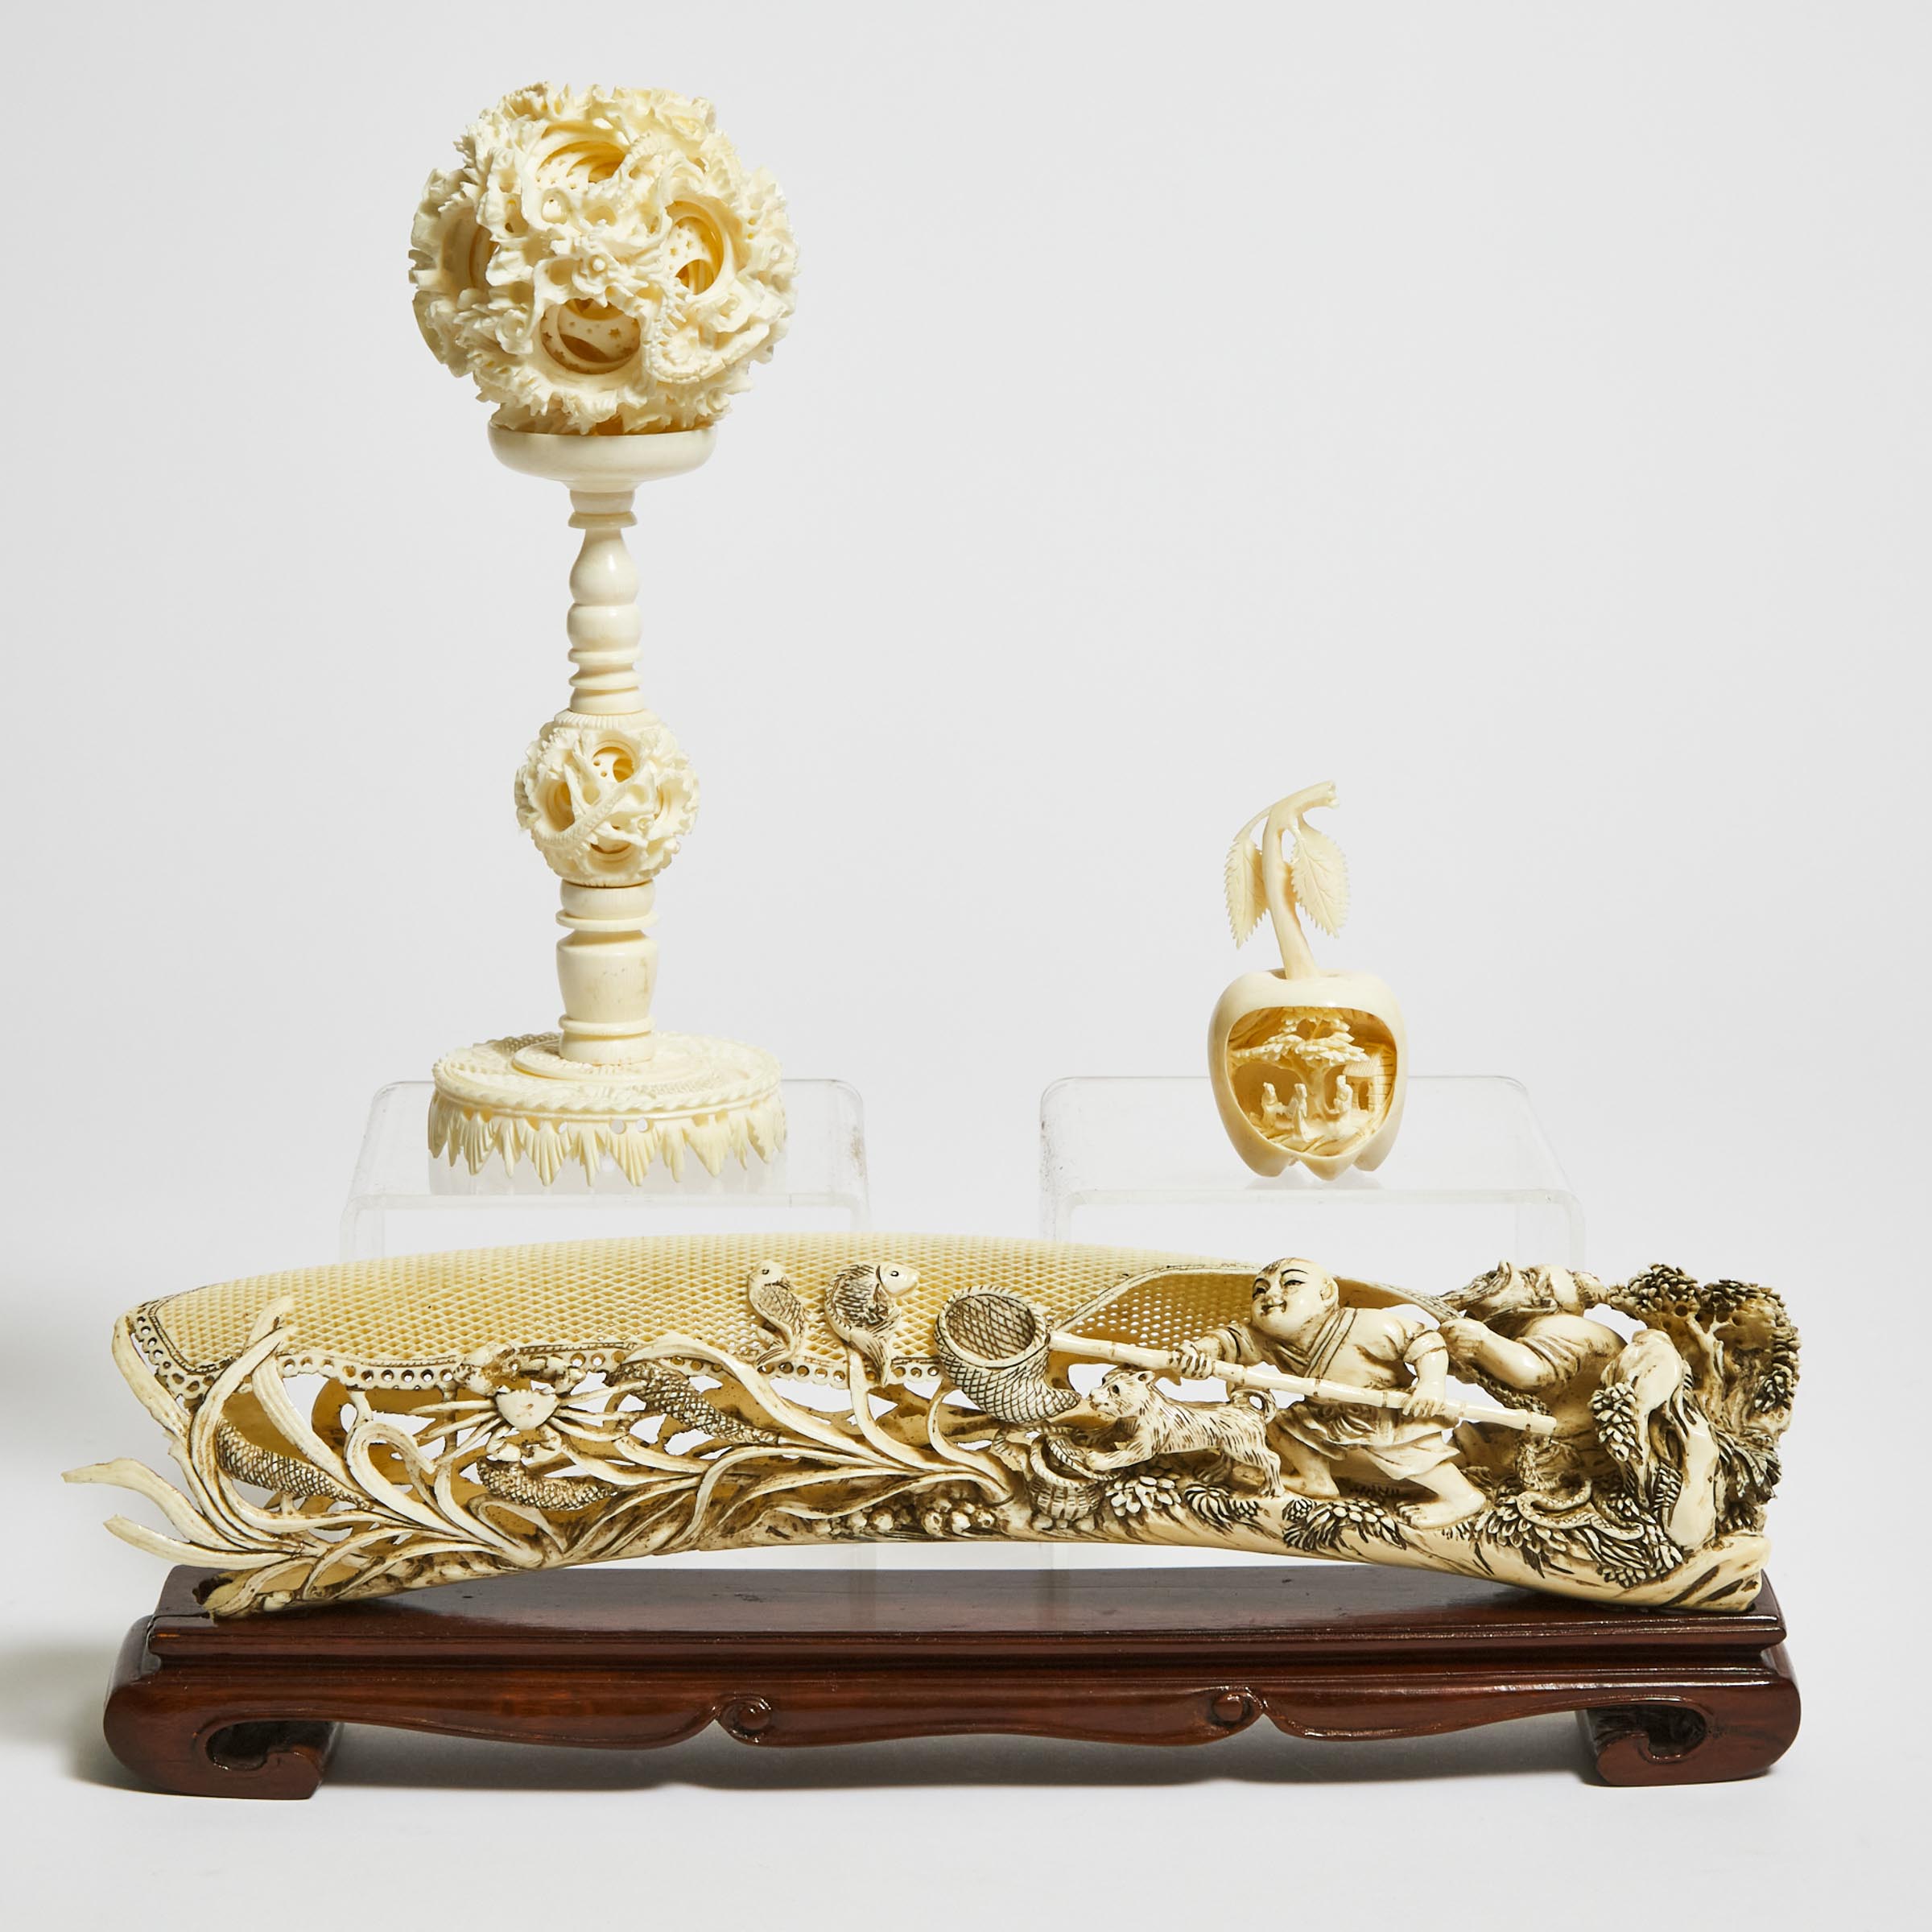 An Ivory Puzzle Ball, Together With a Carving of Two Fisherman and a Carved 'Landscape' Fruit, Early 20th Century